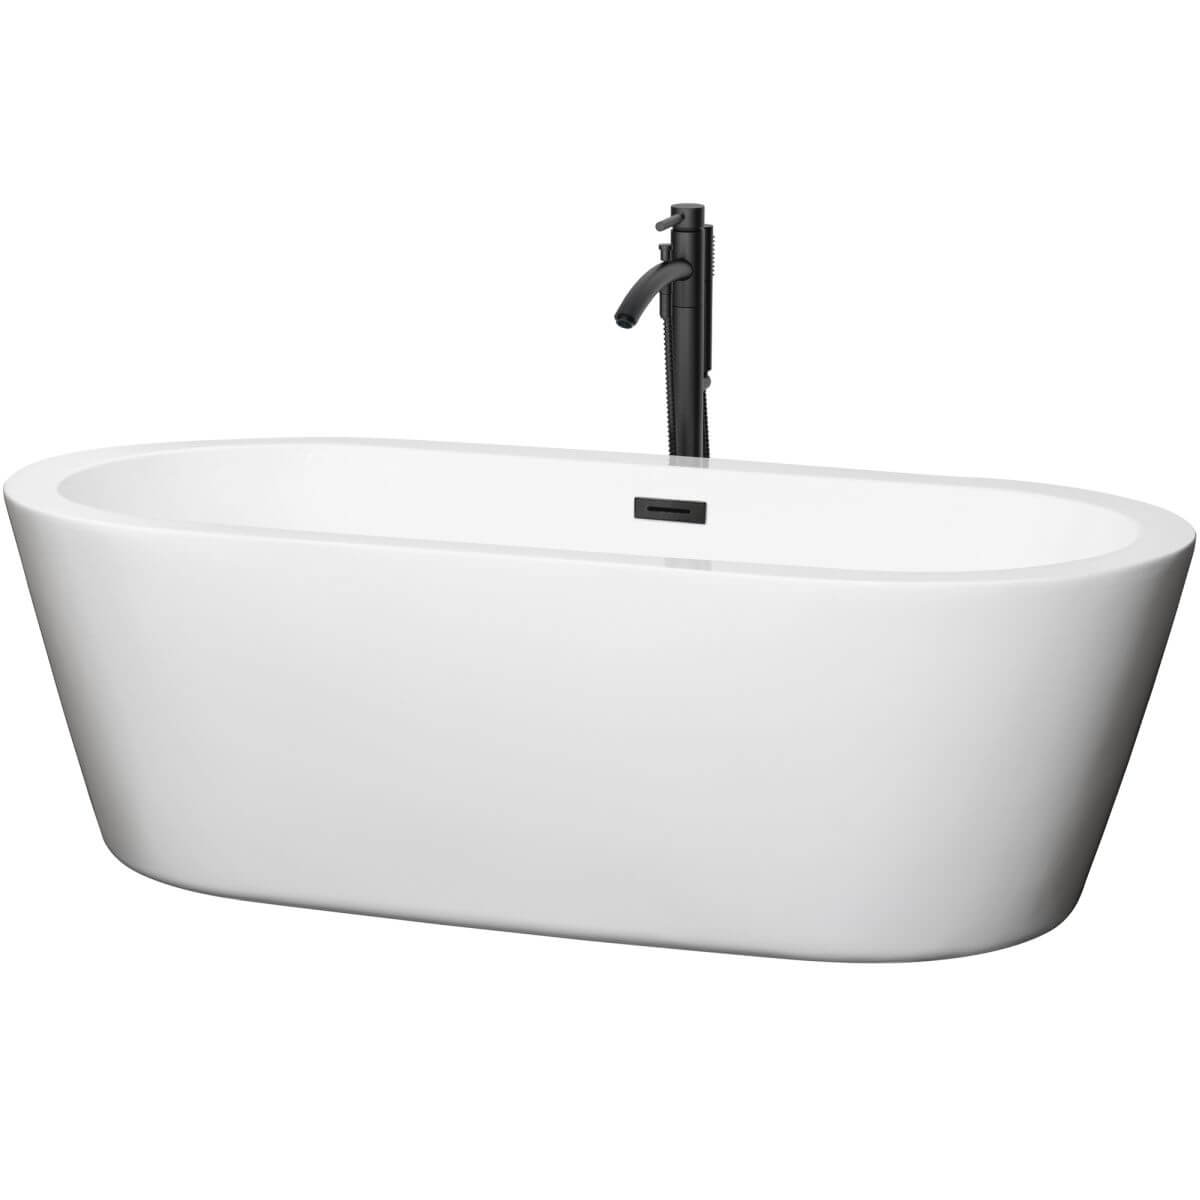 Wyndham Collection Mermaid 71 inch Freestanding Bathtub in White with Floor Mounted Faucet, Drain and Overflow Trim in Matte Black - WCOBT100371MBATPBK